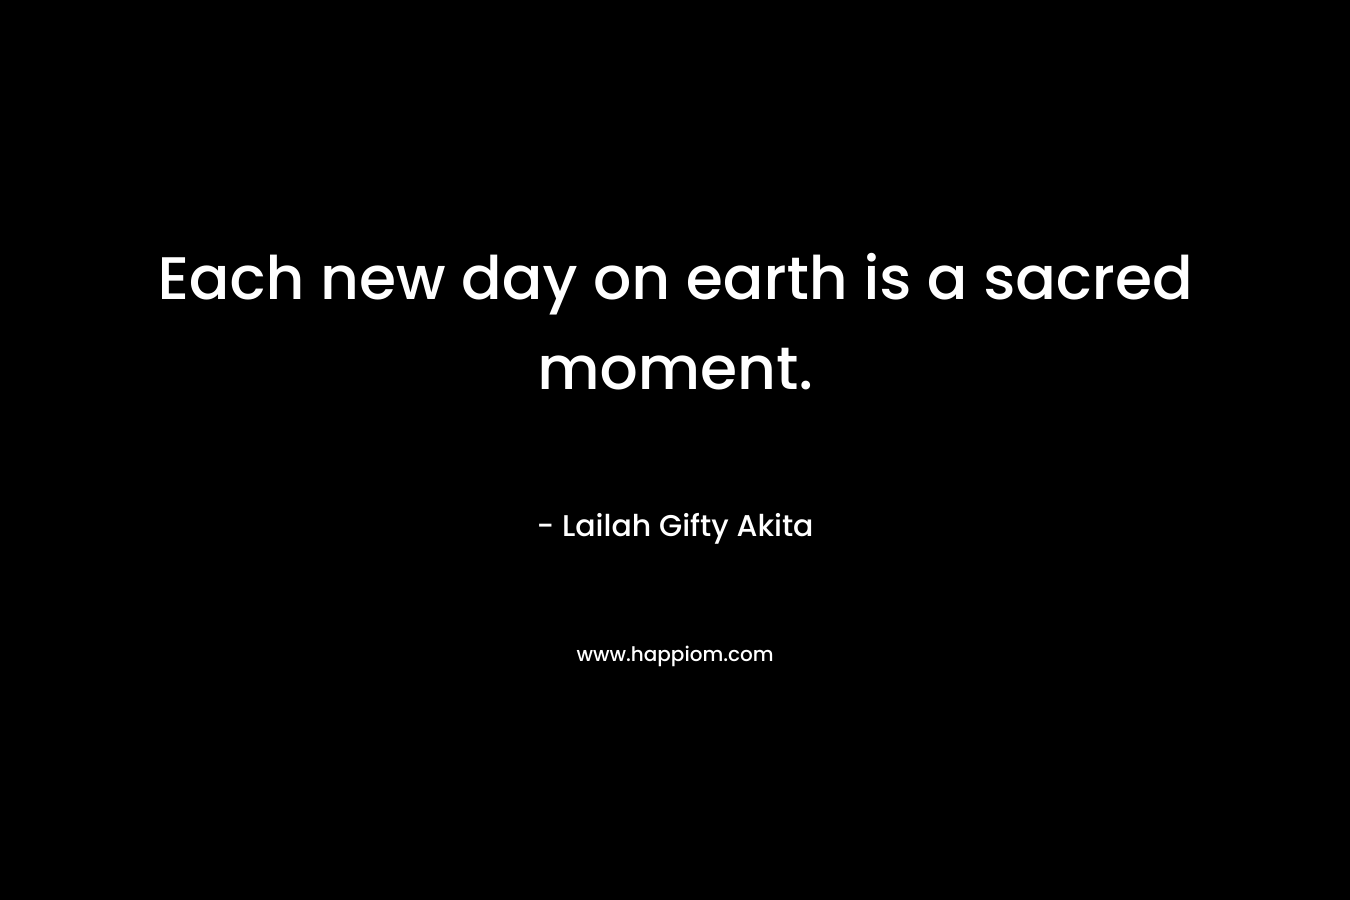 Each new day on earth is a sacred moment.